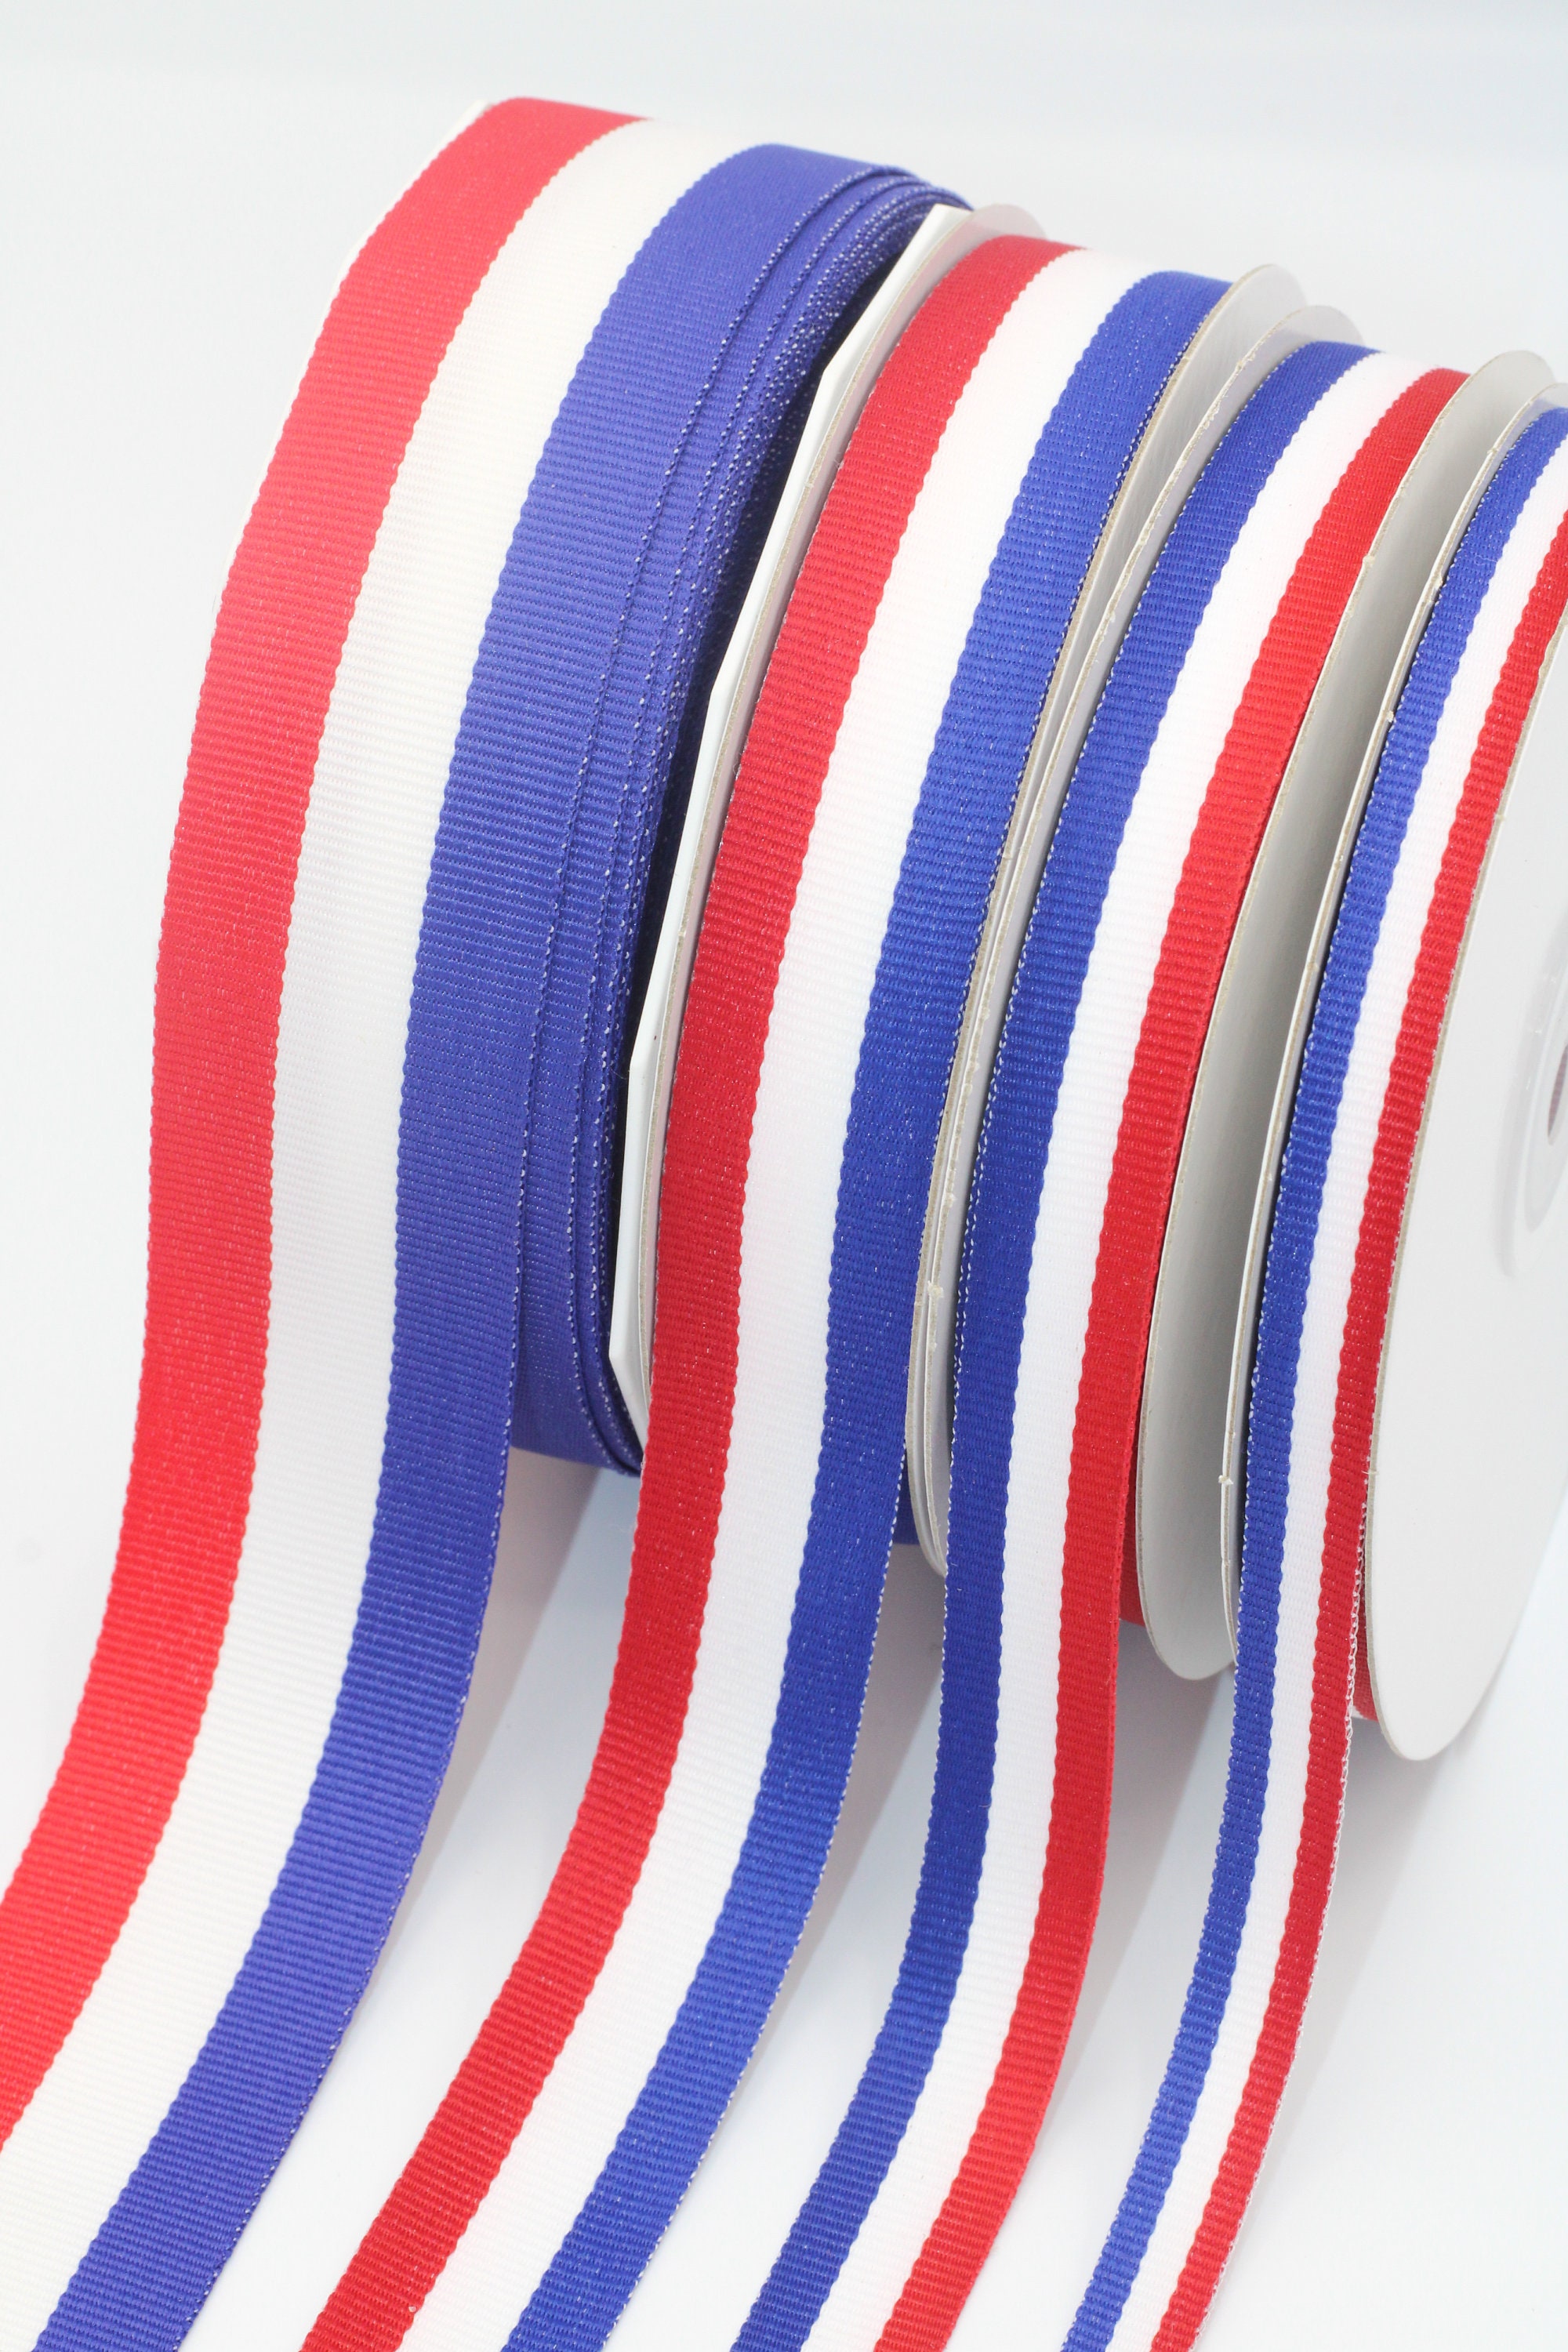 2.5 Stripe Grosgrain Wired Ribbon: Red & White (10 Yards) [7701940-12] 